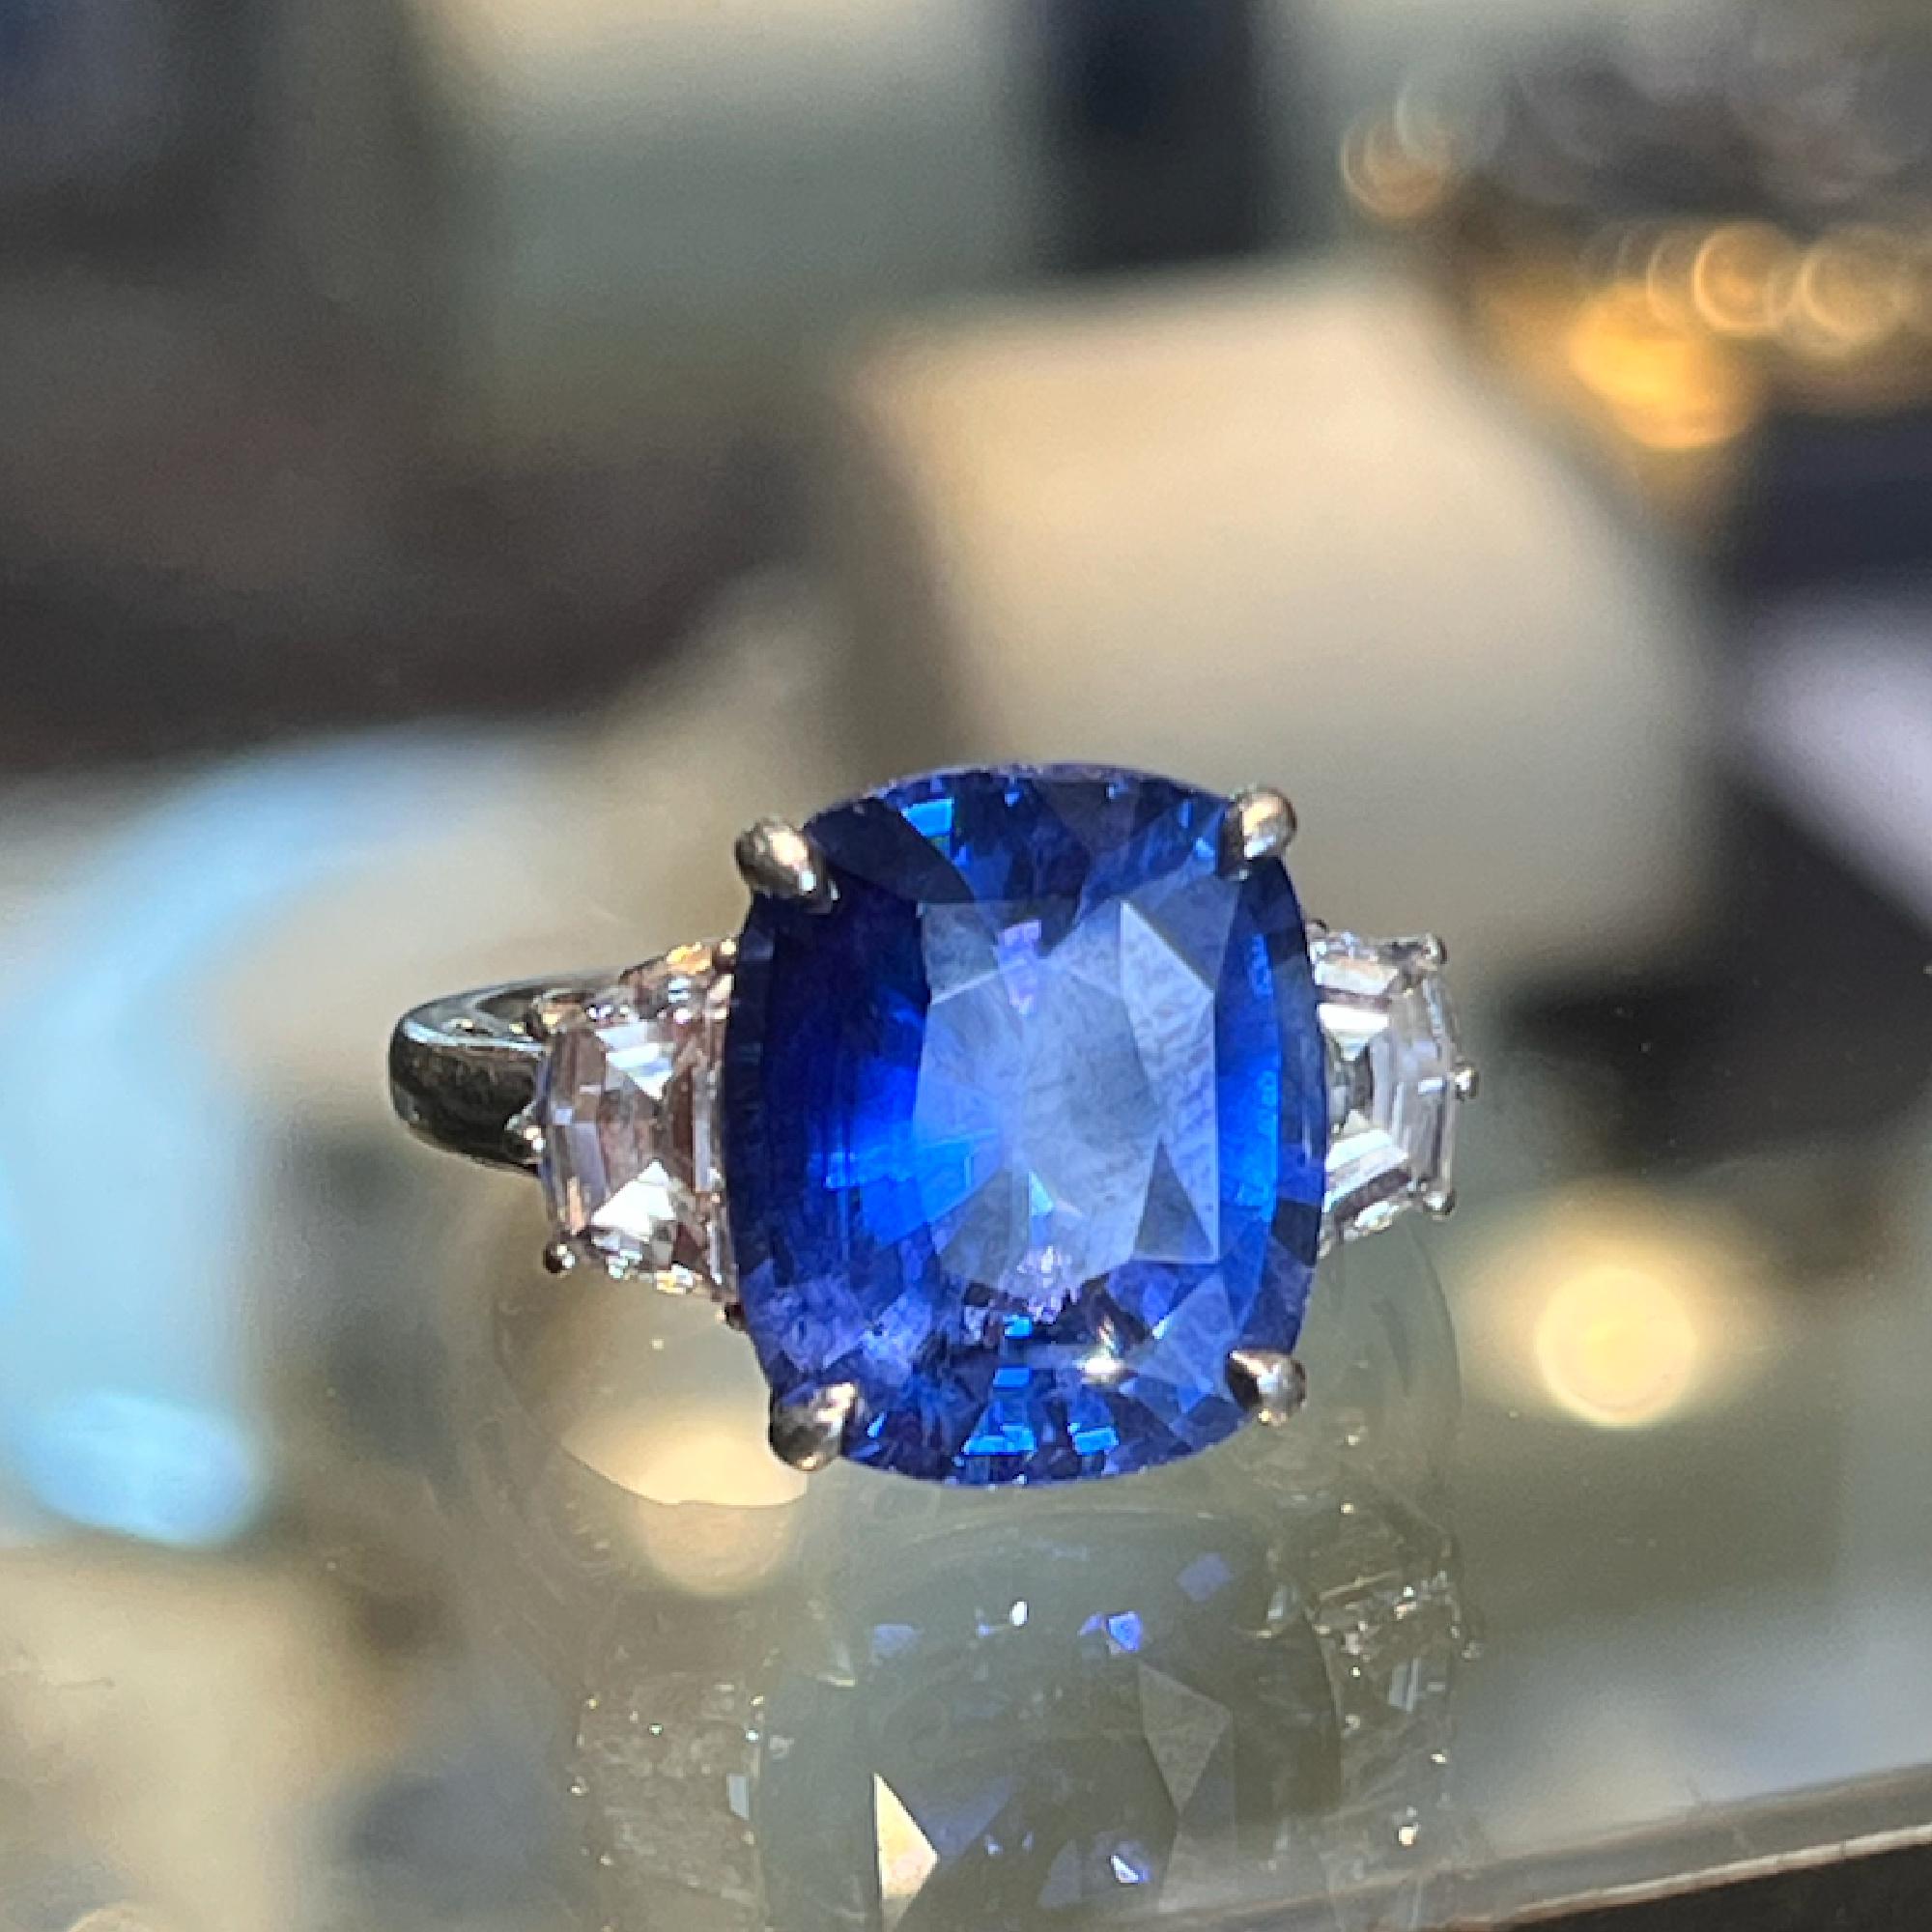 Platinum GIA Certified 9.35 Carat Ceylon Sapphire & Diamond Lady’s Three (3) Stone Ring. This Ring Contains (1) Cushion Cut Ceylon Sapphire Weighing Approximately 9.35cts, This Stone Measures 13.20mm x 11.15mm x 6.45mm. The Stone is Vibrant Blue in